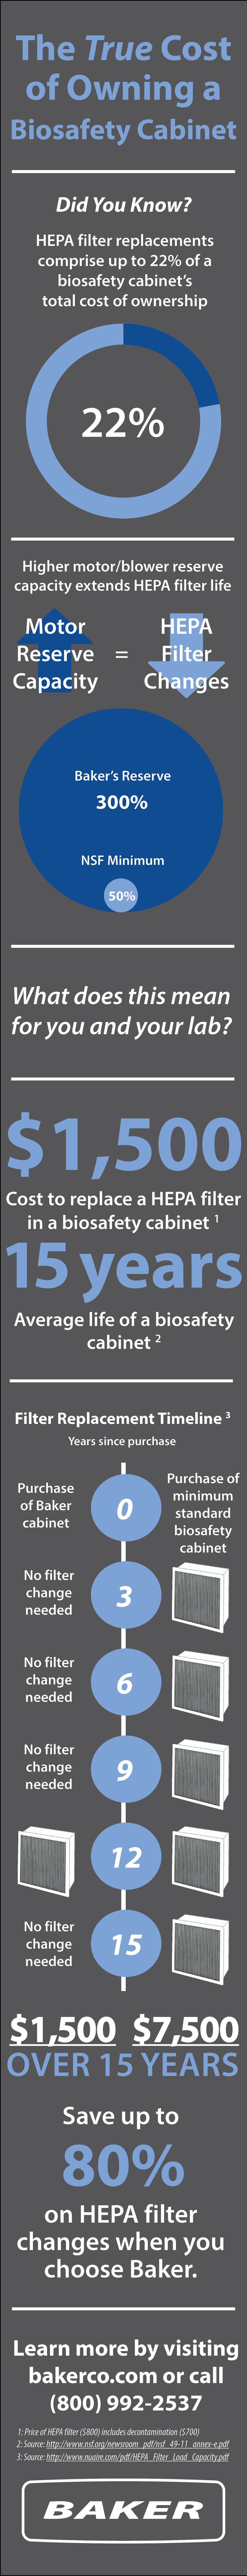 Biosafety Cabinet Hepa Filter Replacements Reducing Costs Baker